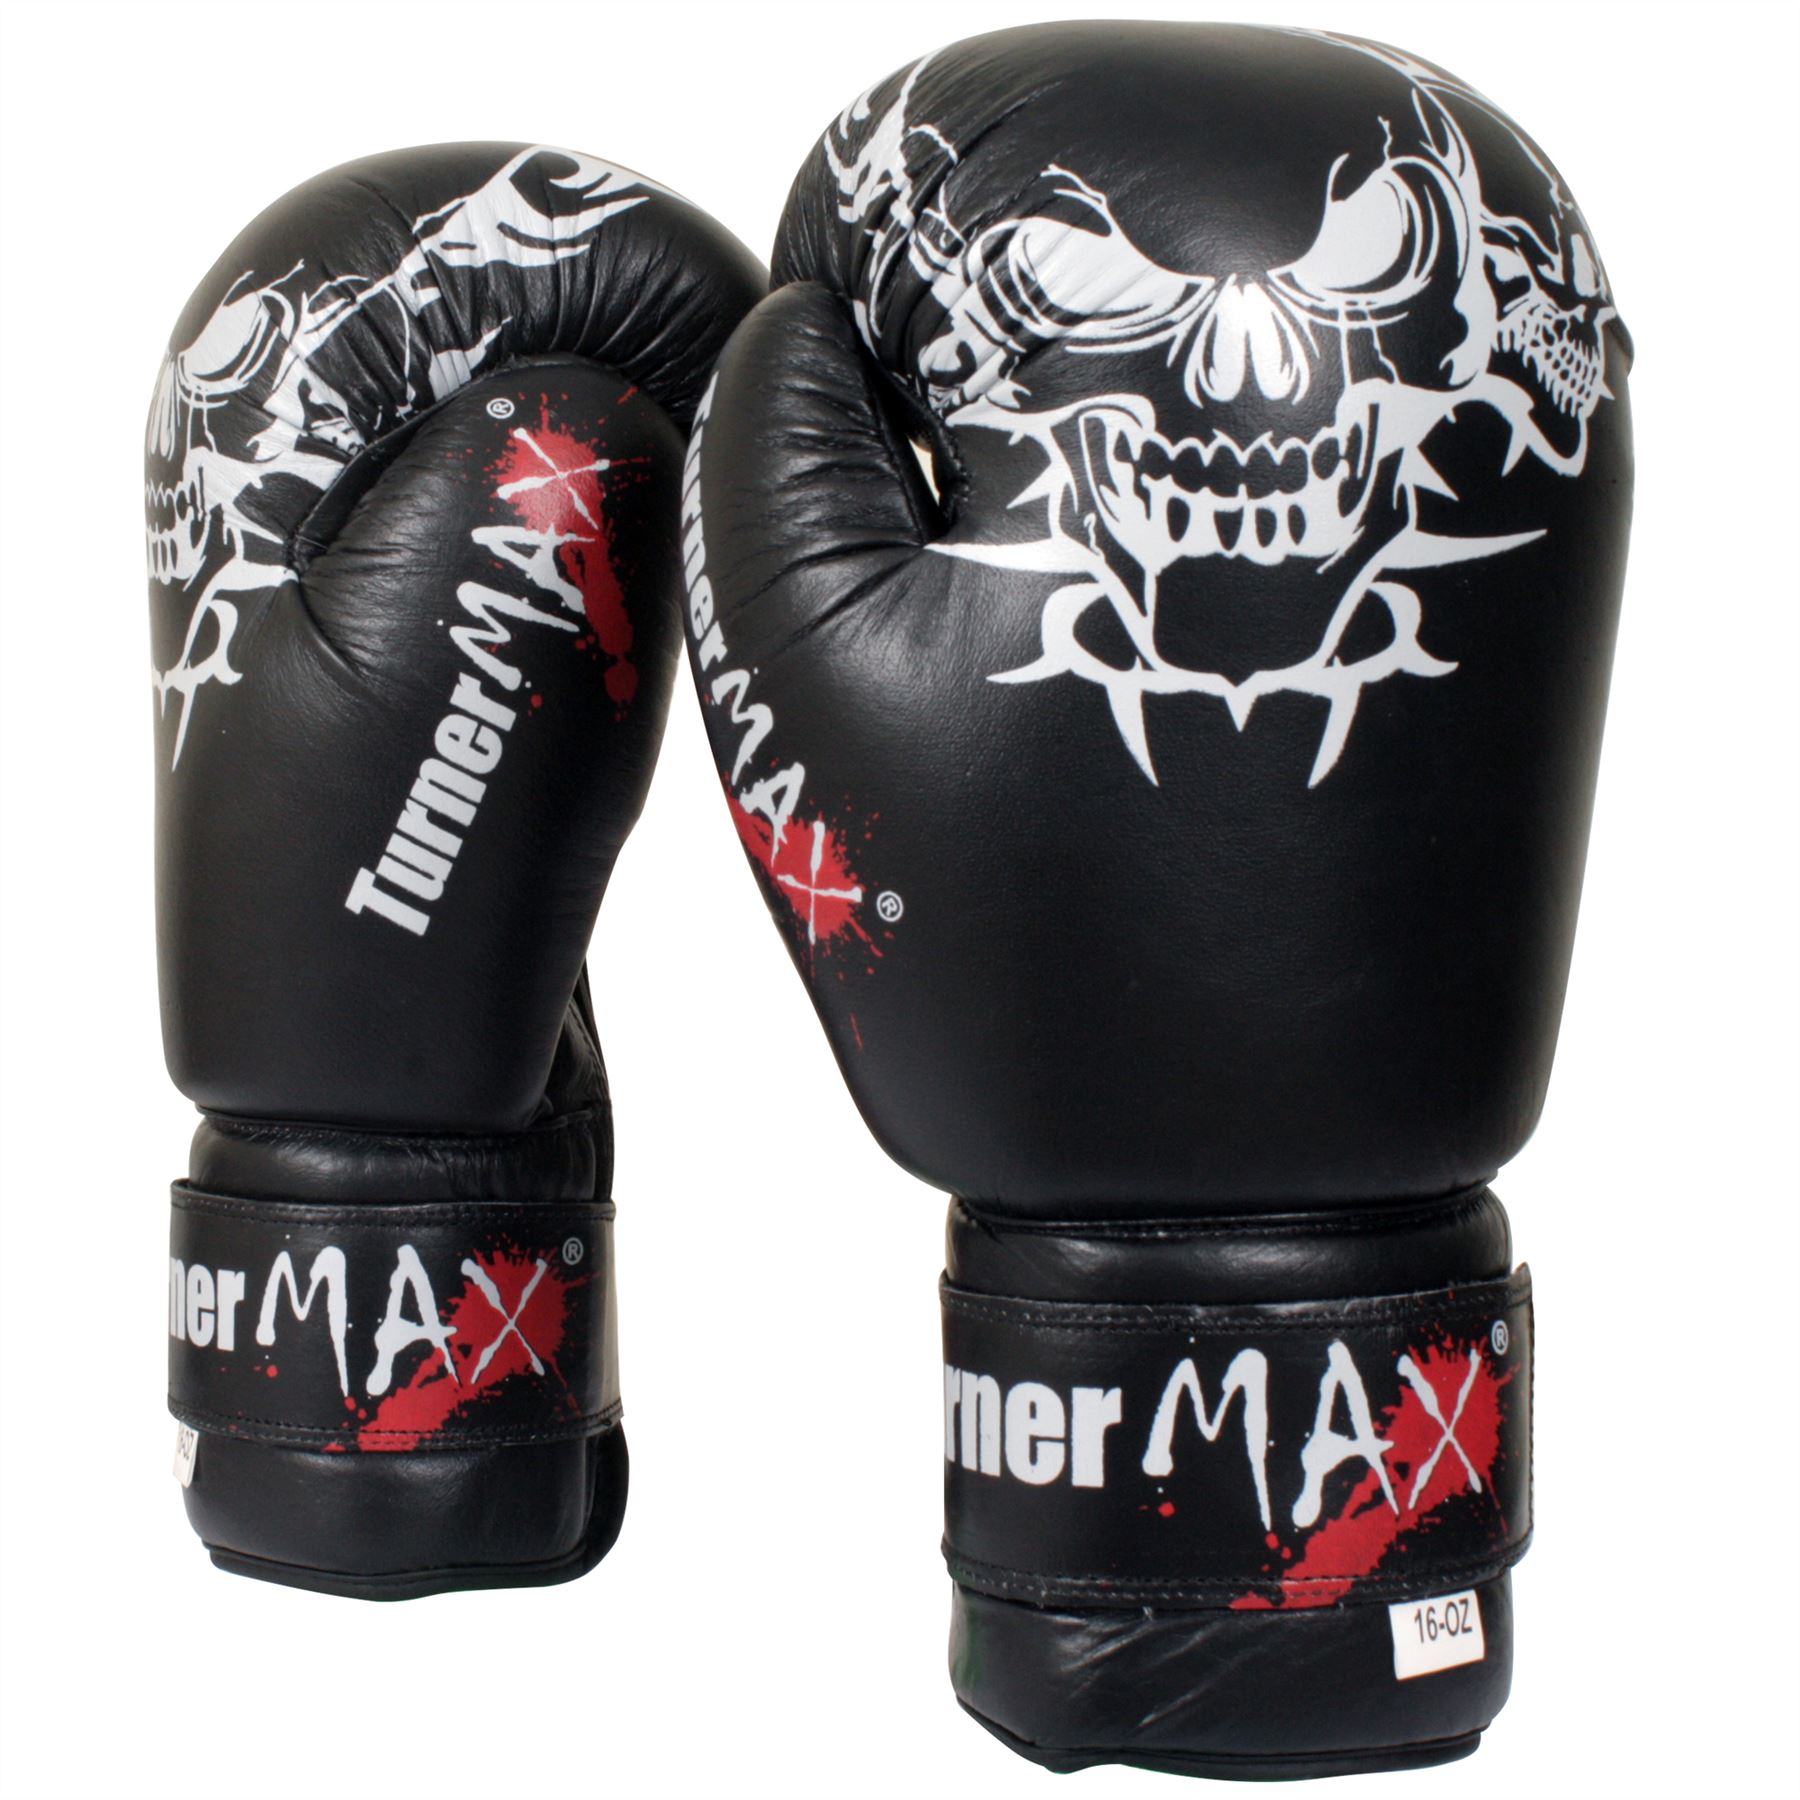 A Guide To Buying Proper Boxing Gloves by Turner Sports